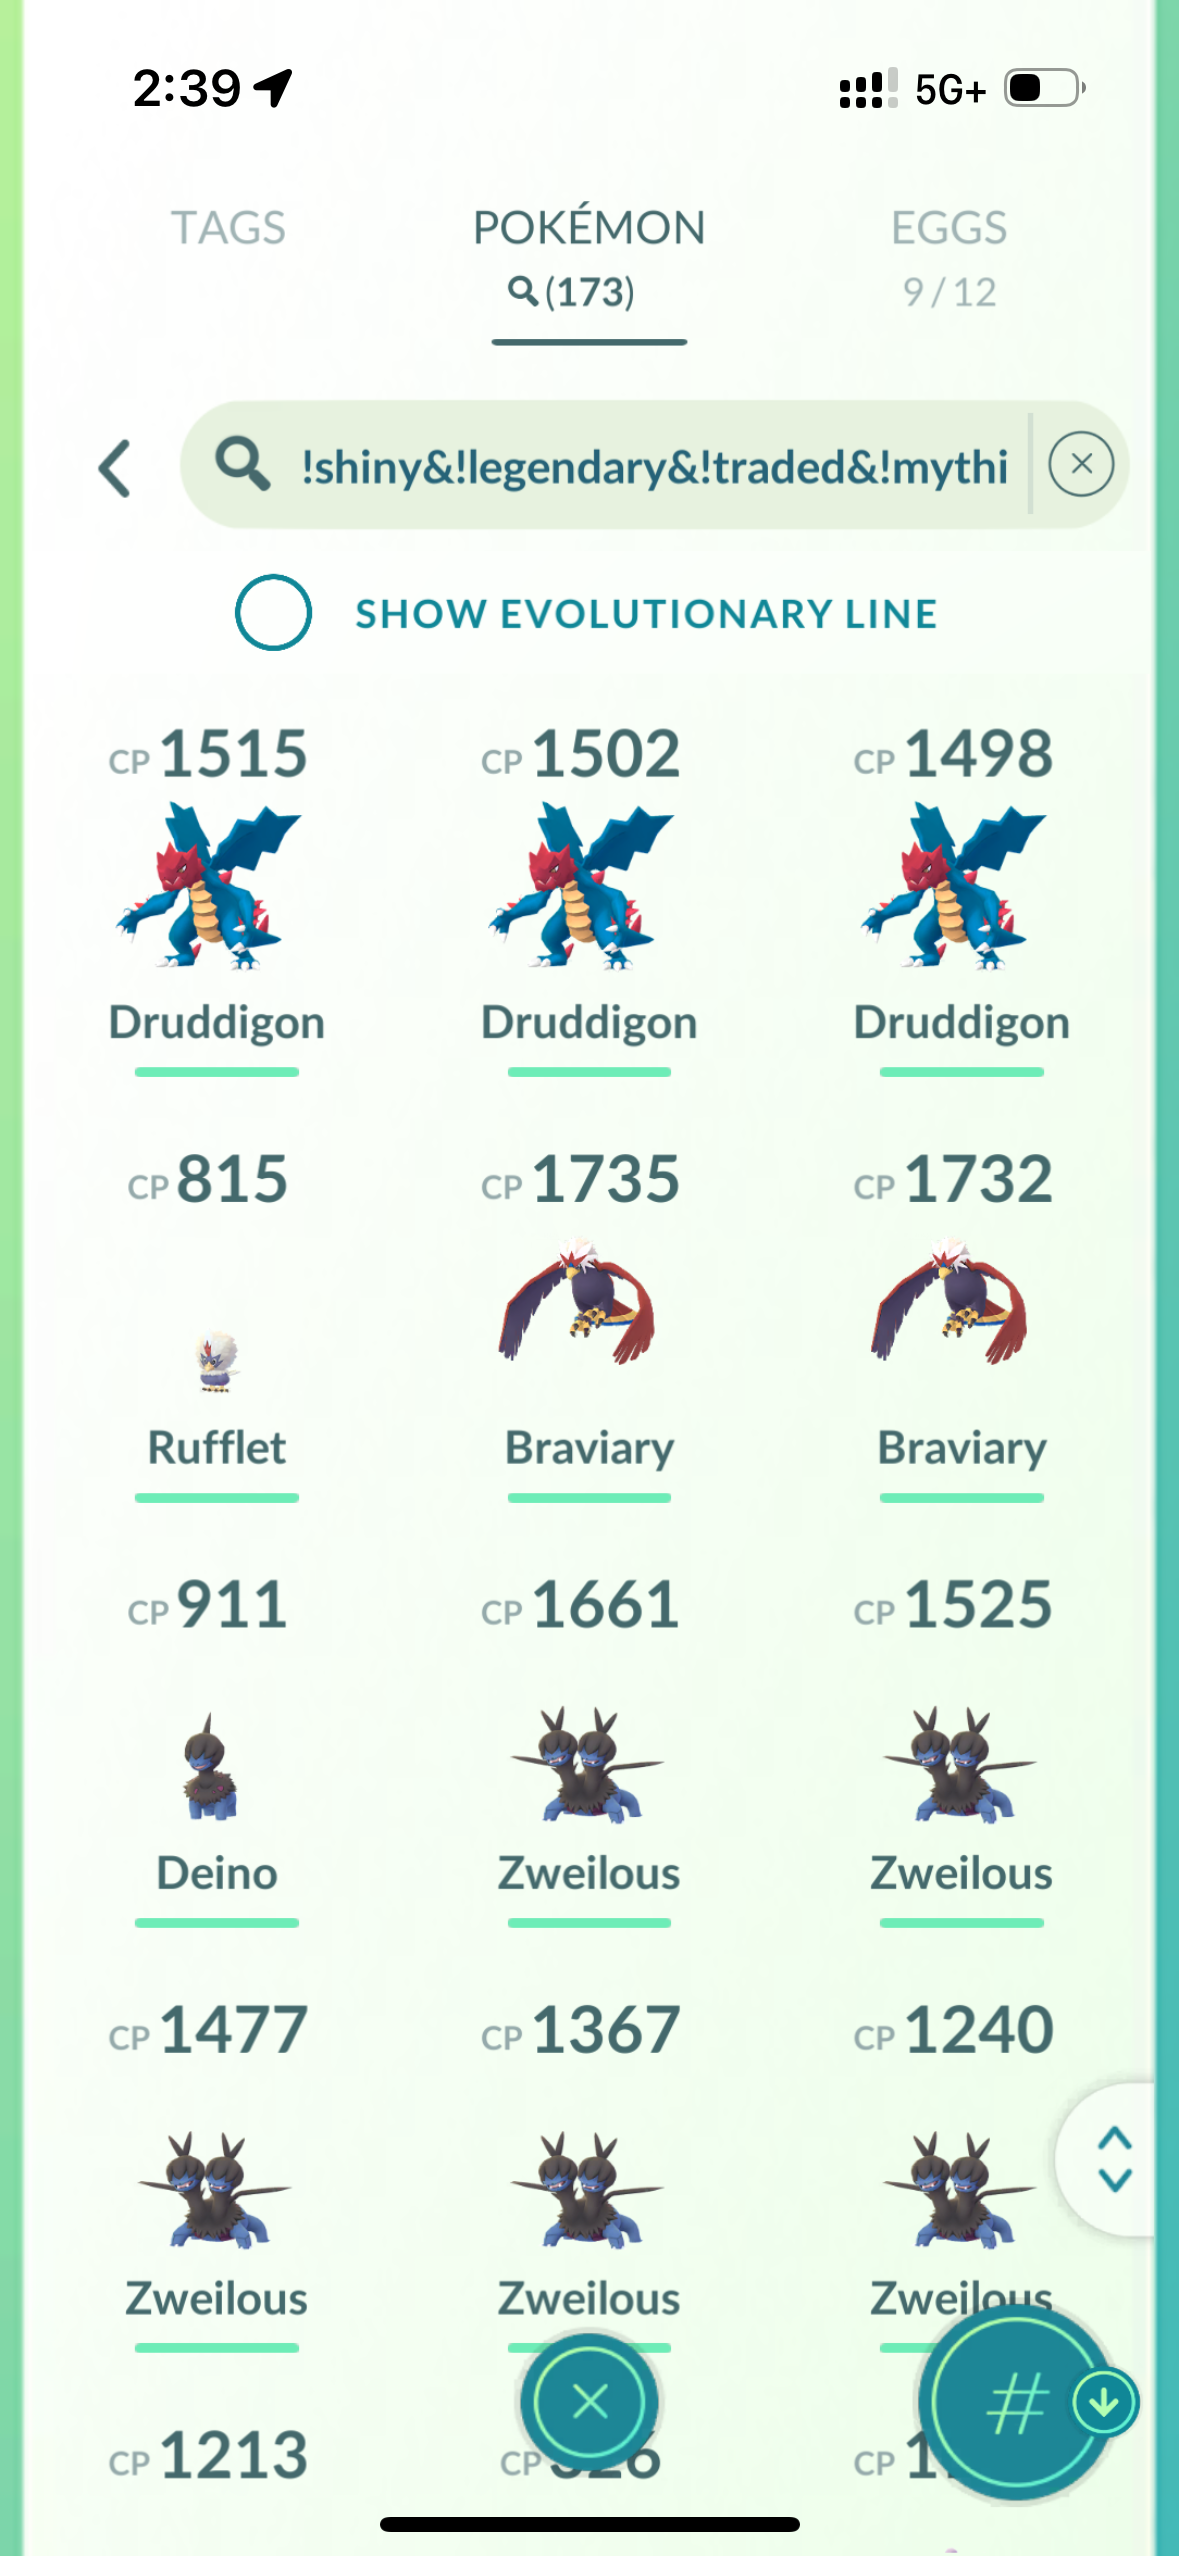 GTP11 account (5 years old/112 shiny/legendary)